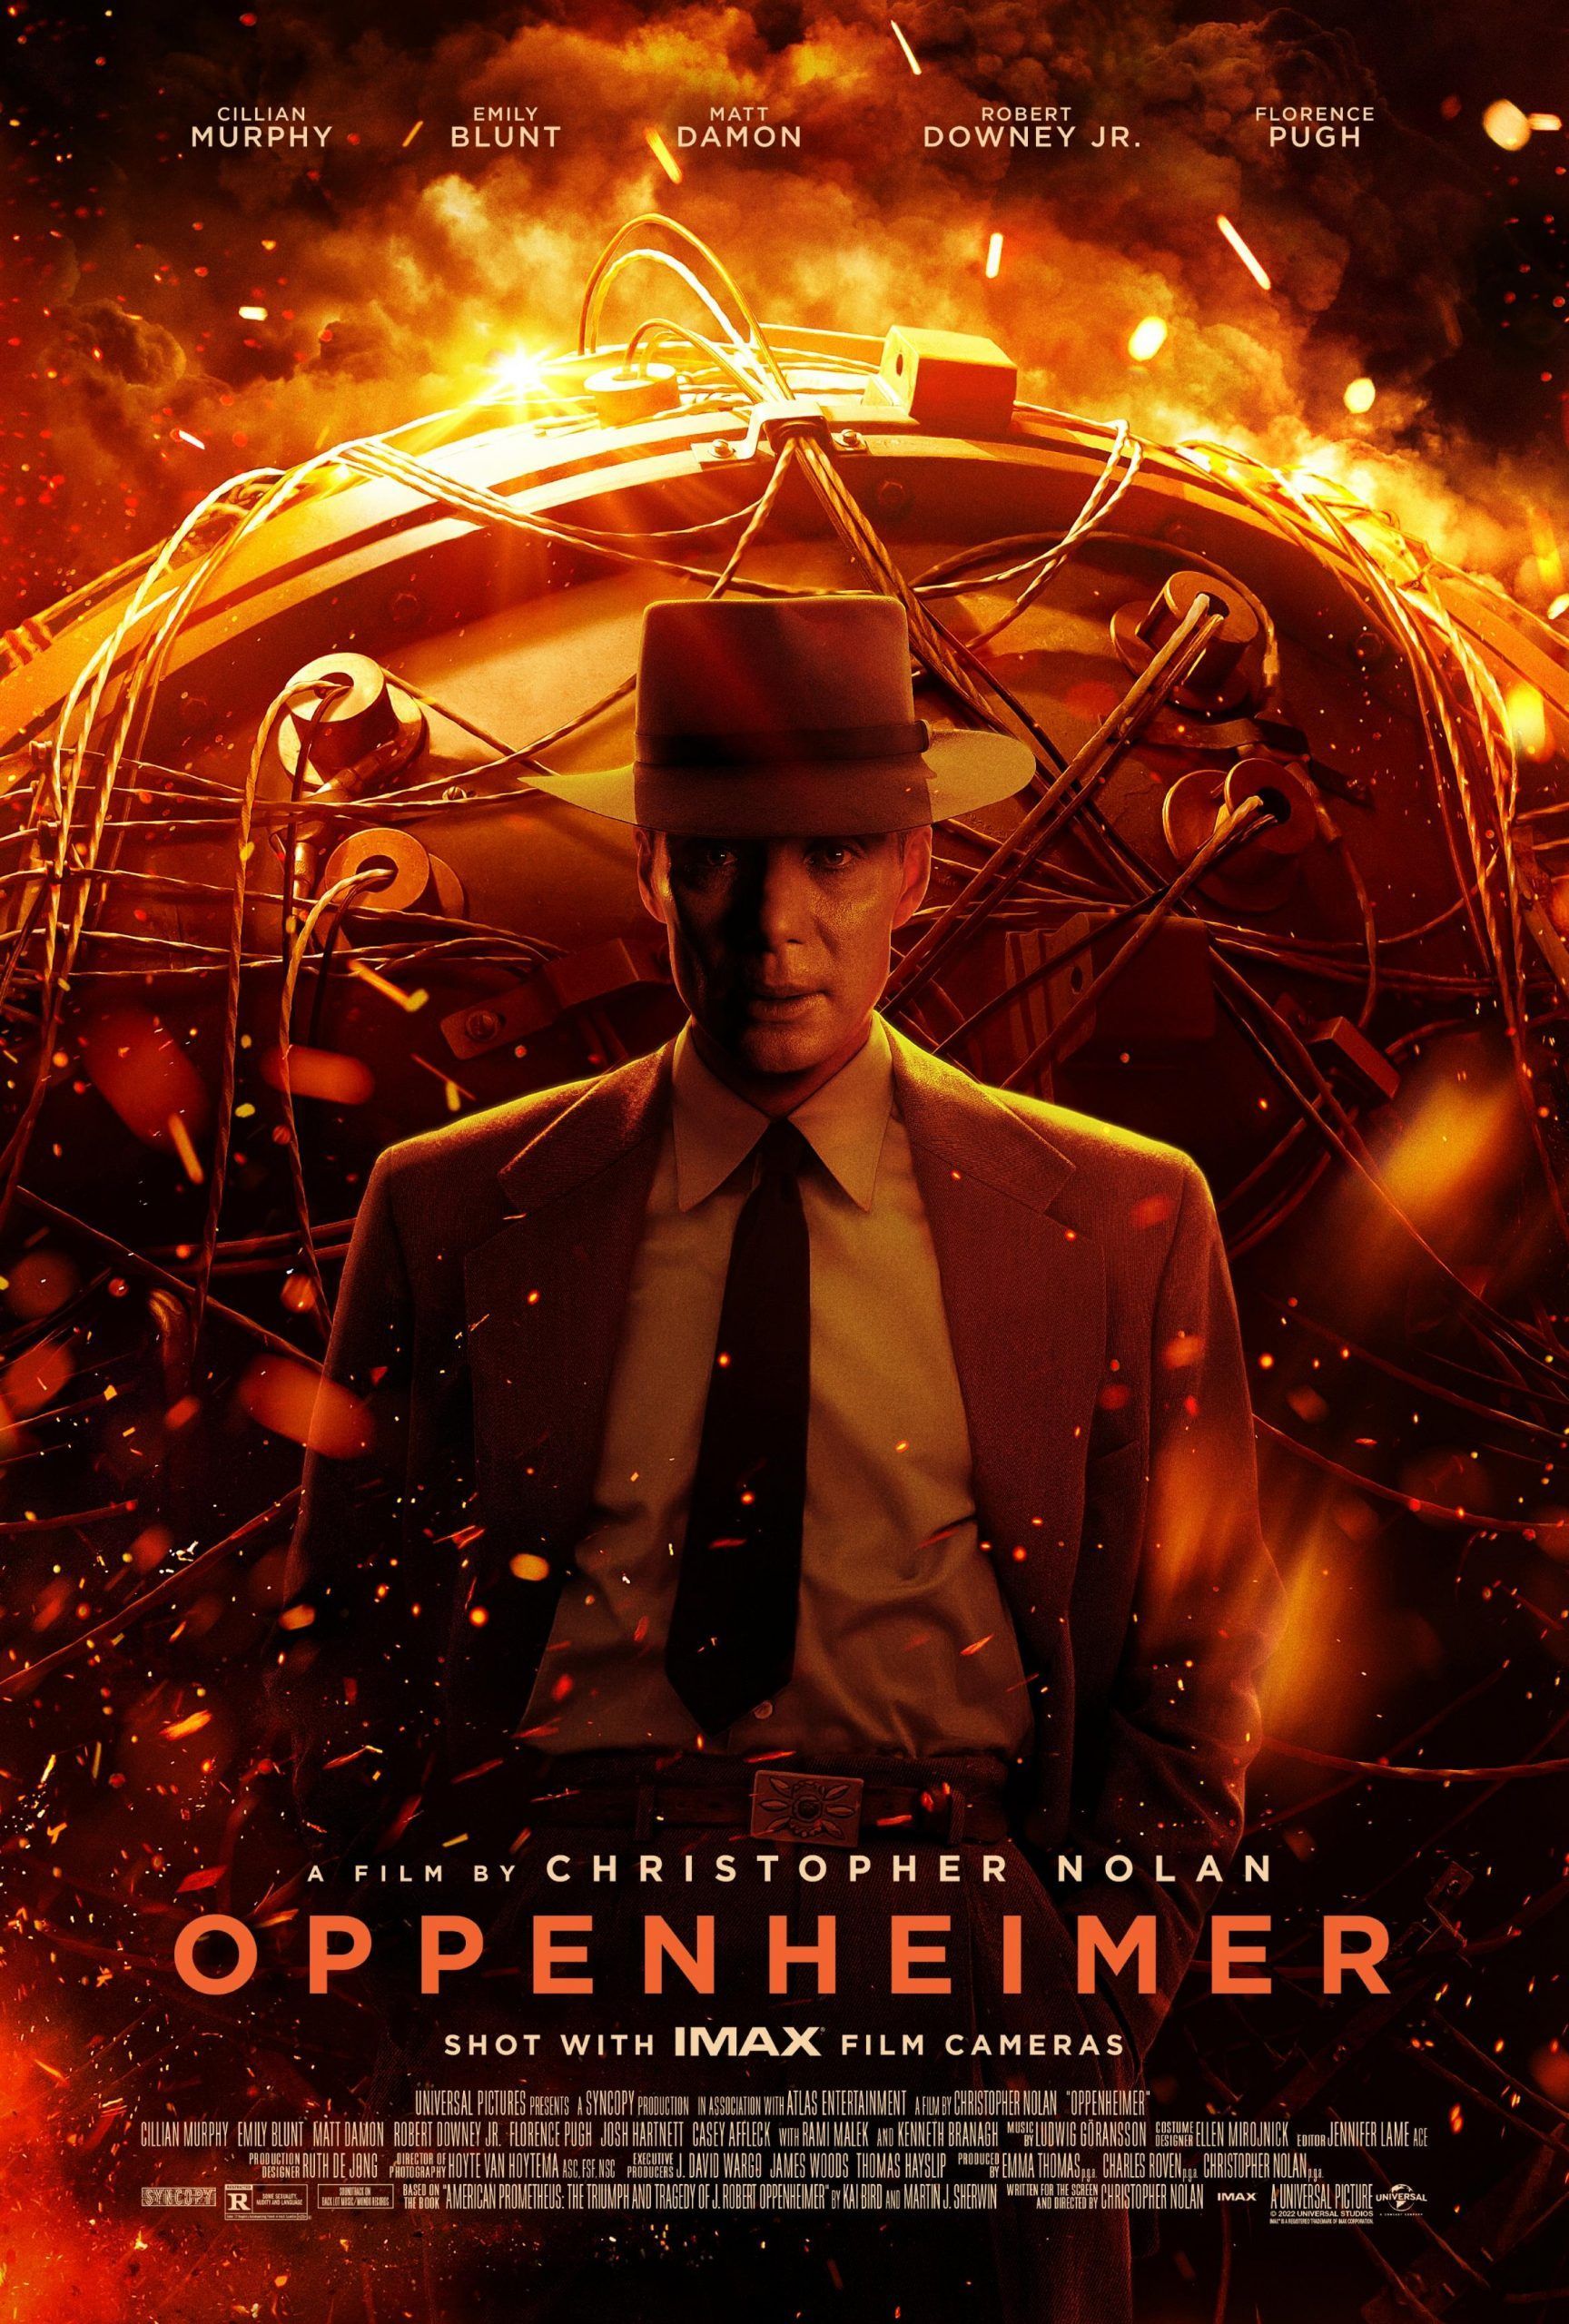 Become Death: On Christopher Nolan's “Oppenheimer”